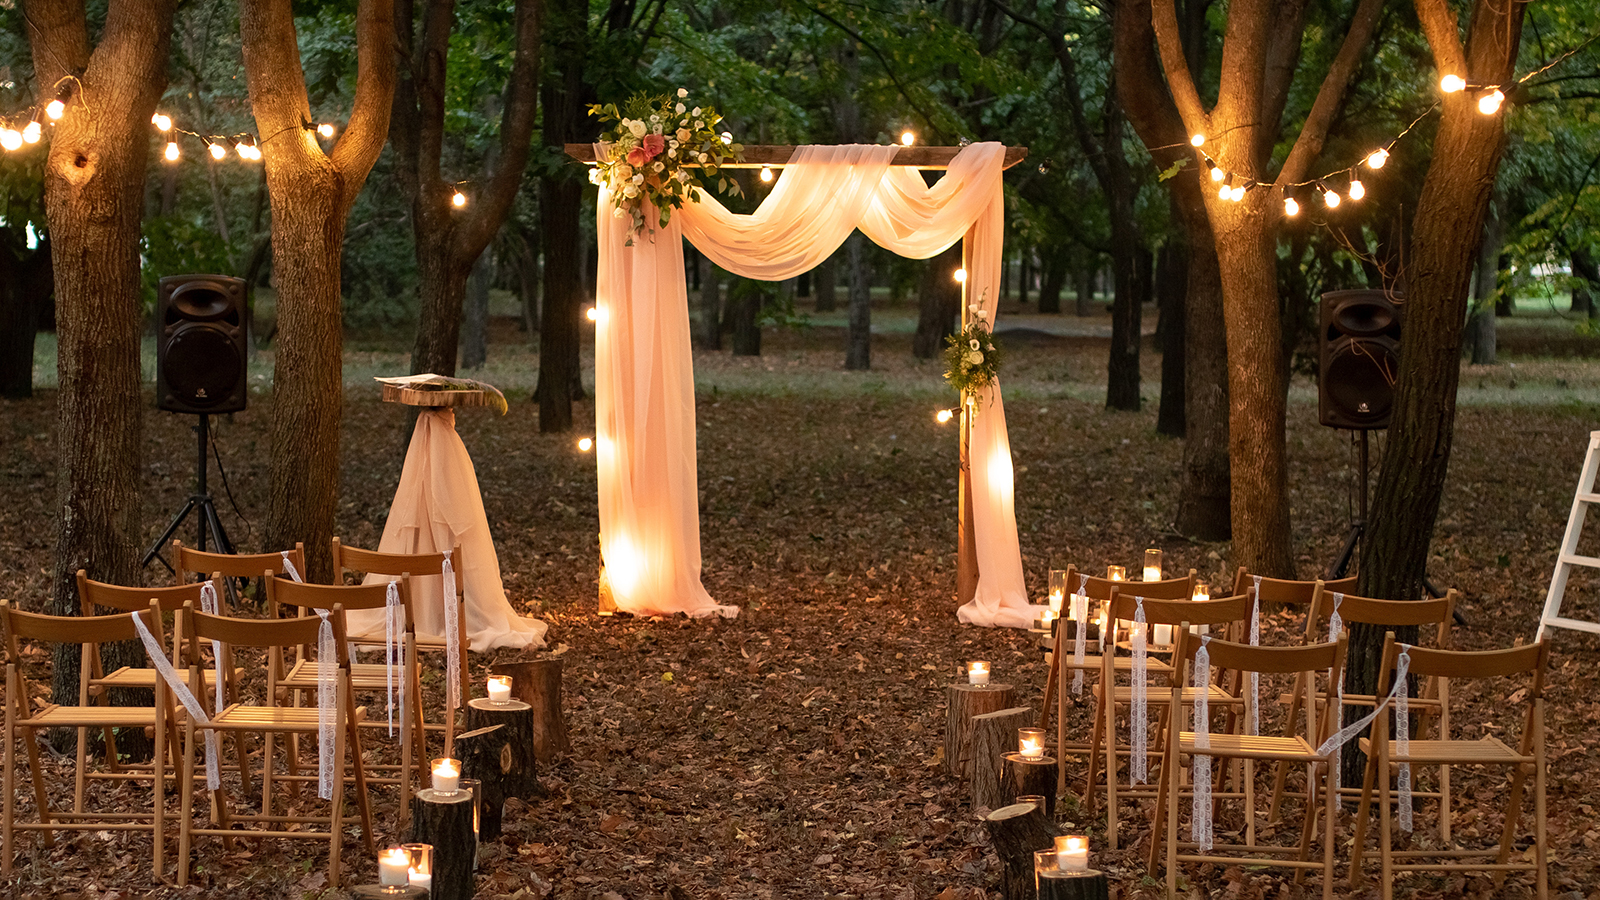 Wedding arch in the woods with light bulbs. Beautiful wedding rustic in the forest. Seats for guests at a beautiful wedding with light bulbs in the forest.